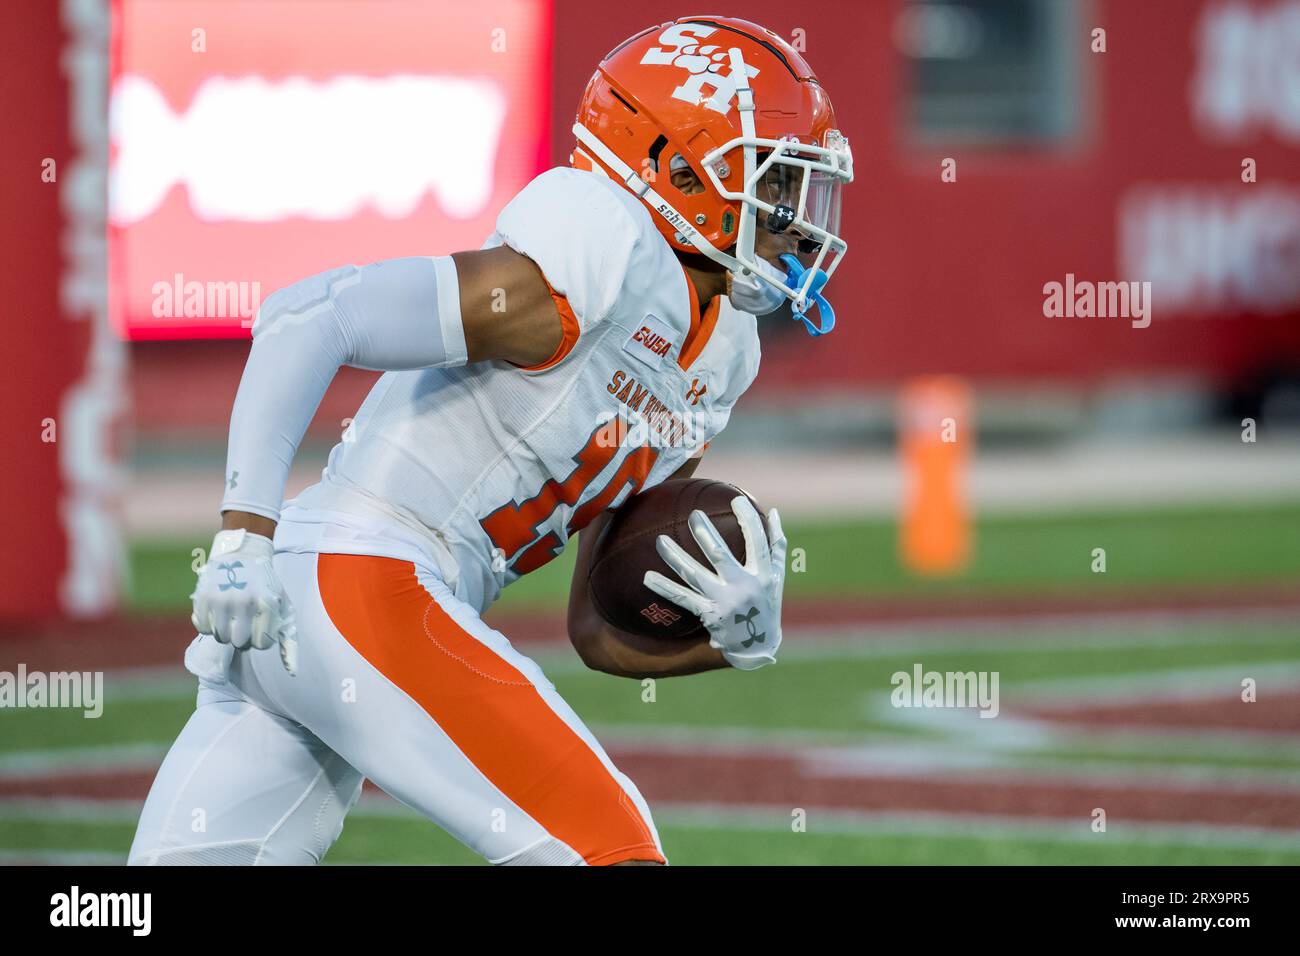 Houston, TX, USA. 23rd Sep, 2023. Sam Houston State Bearkats wide receiver Malik Phillips (19) returns a kick during a game between the Sam Houston State Bearkats and the Houston Cougars in Houston, TX. Trask Smith/CSM (Credit Image: © Trask Smith/Cal Sport Media). Credit: csm/Alamy Live News Credit: Cal Sport Media/Alamy Live News Stock Photo